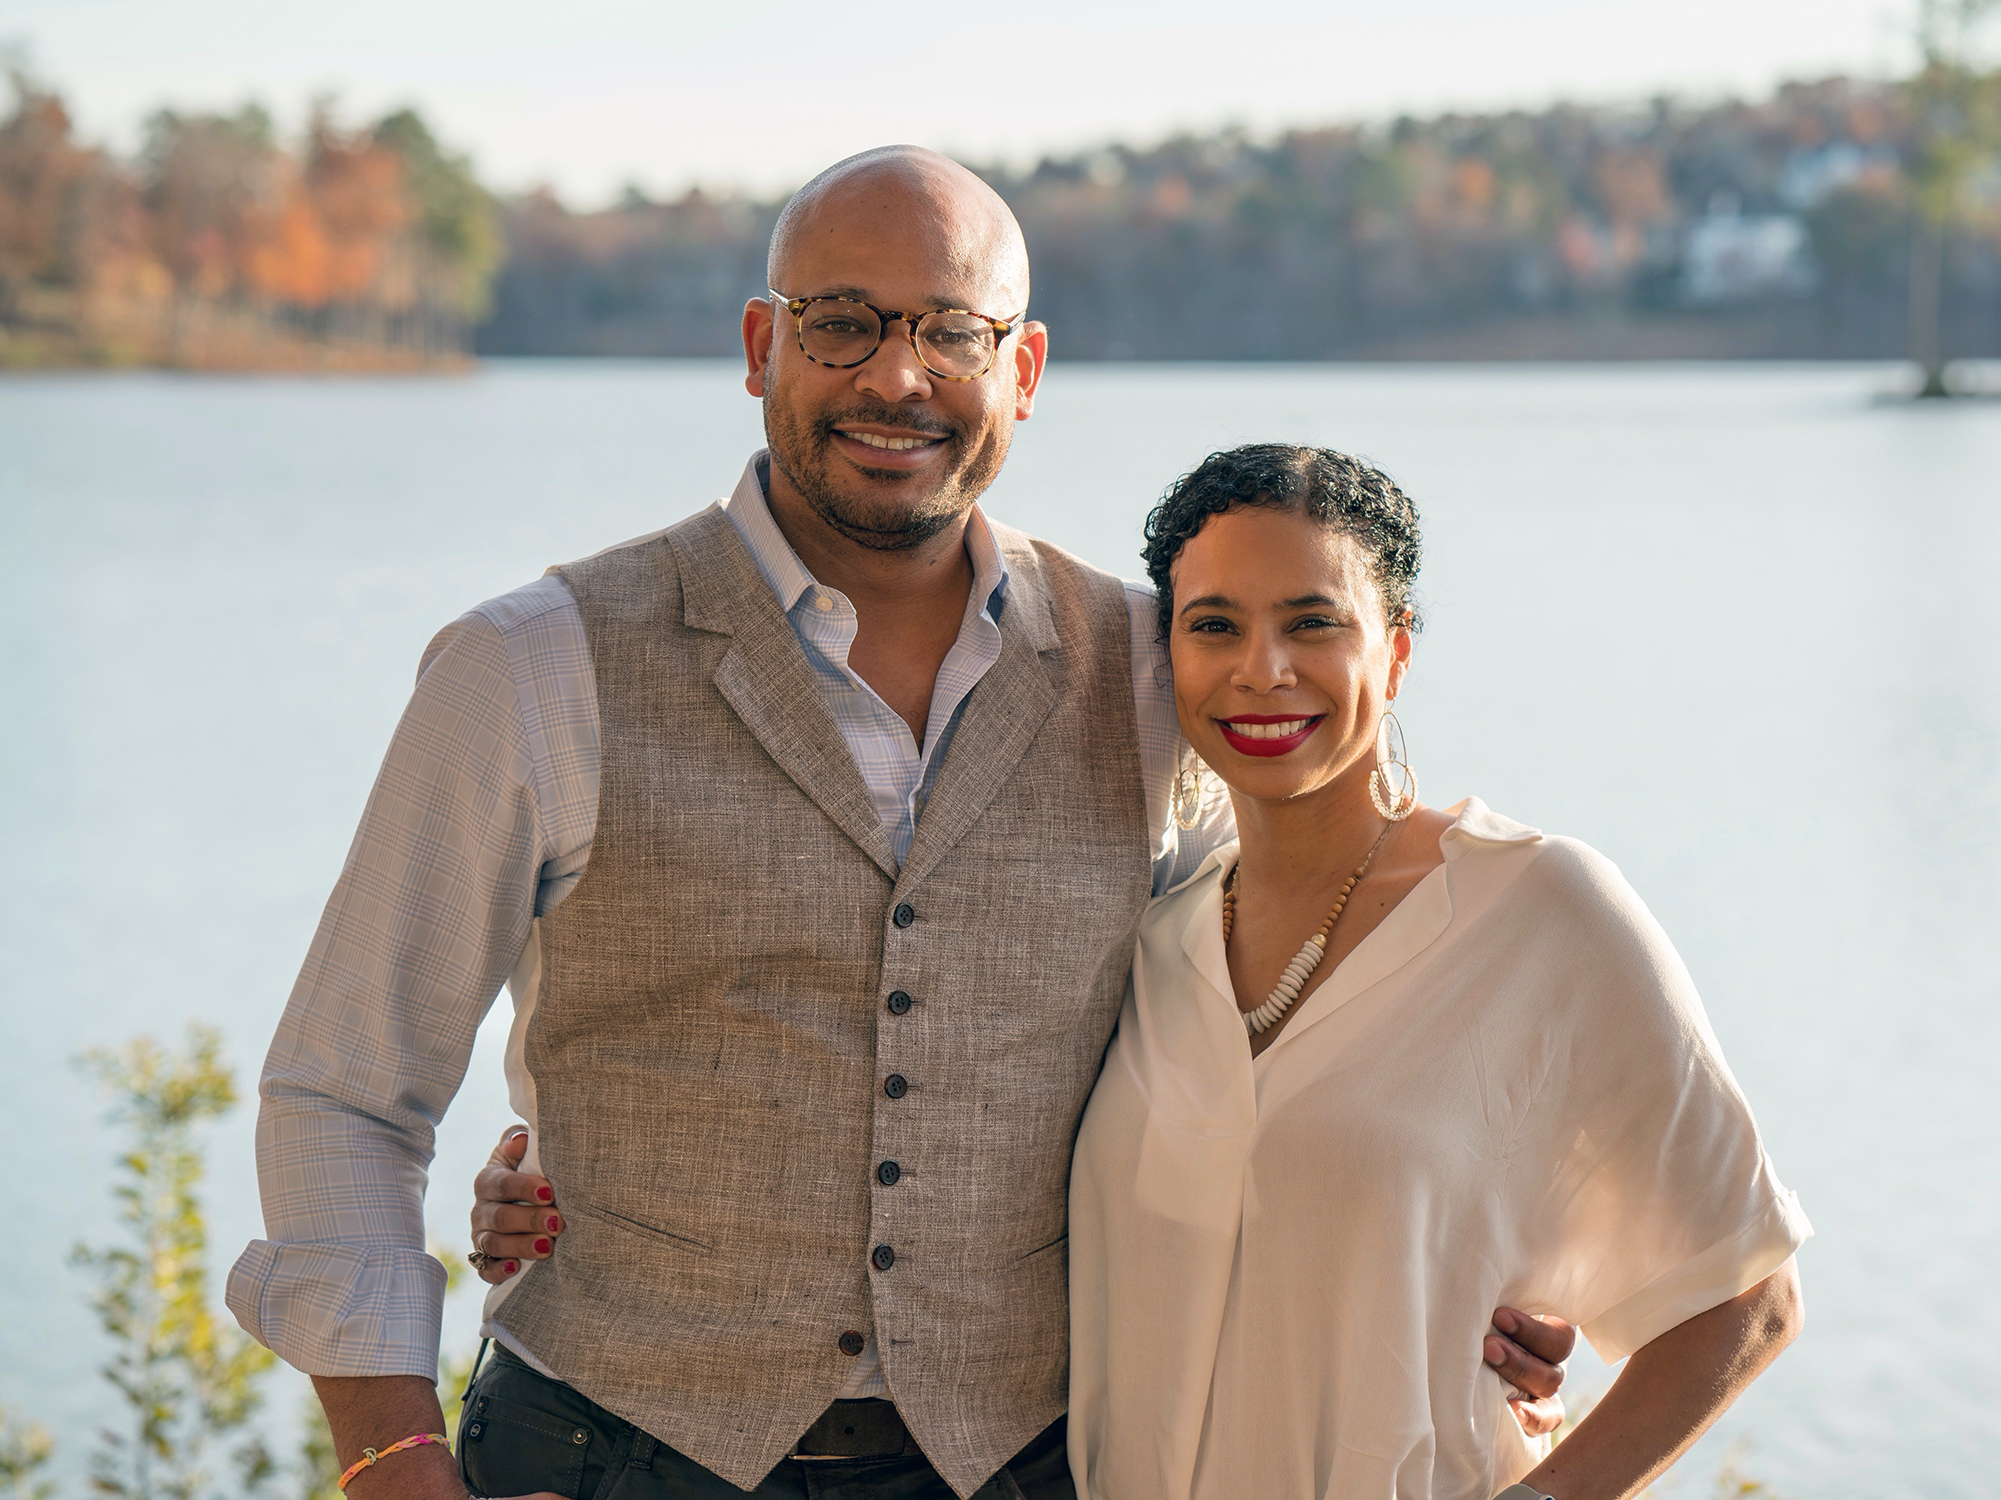 M.J. and Jennifer Blakely: Finding the path to create change